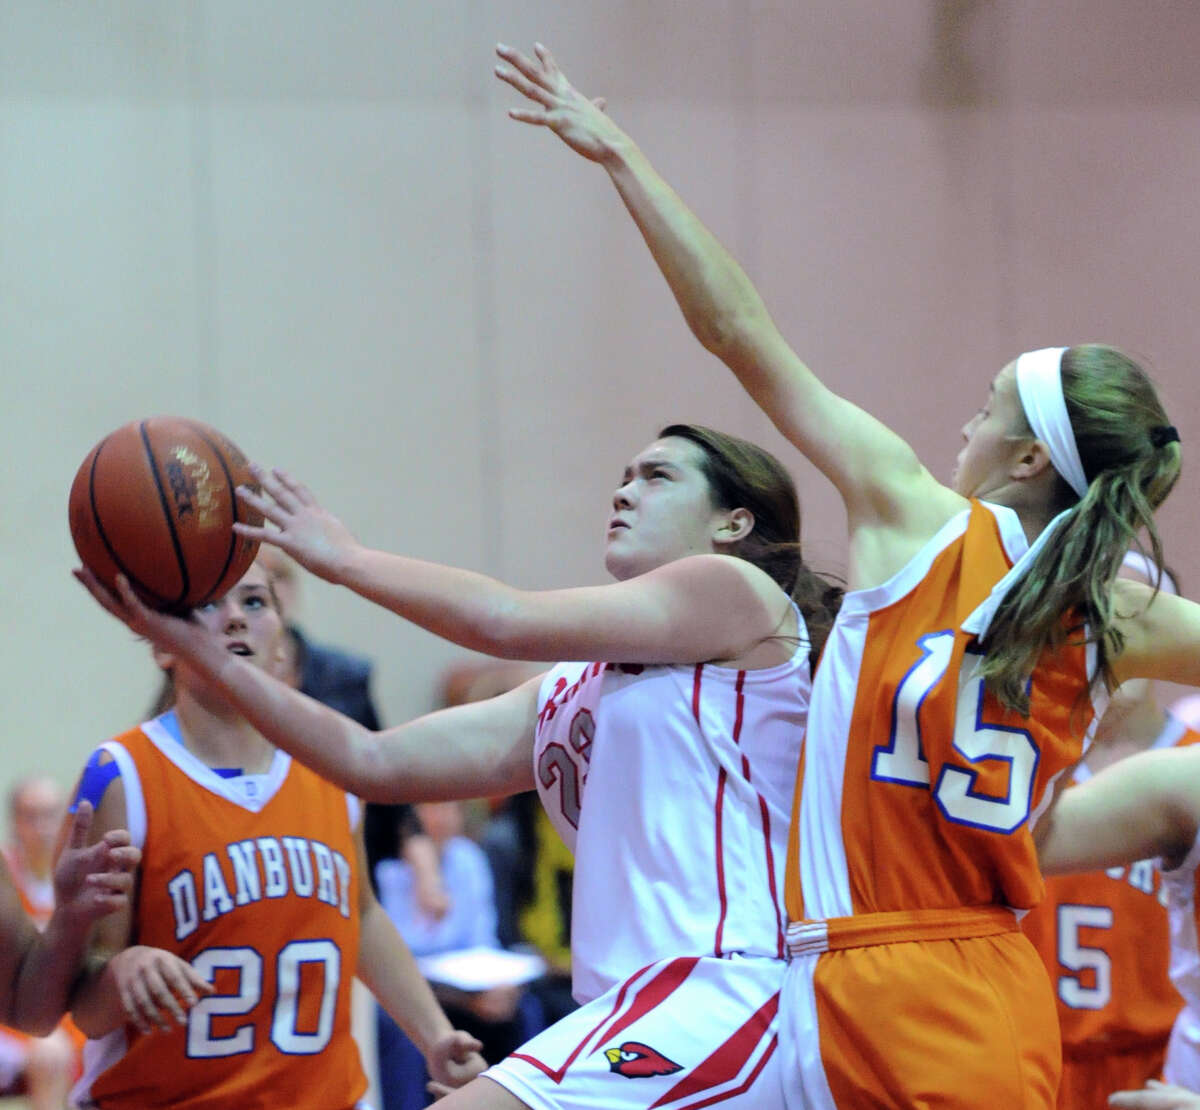 At center, Jamie Kockenmeister (# 23) of Greenwich goes in for a lay-ip while being defended by Danbury's Rebecca Gartner (# 15), right, during the girls high school basketball game between Greenwich High School and Danbury High School at Greenwich, Friday night, Dec. 20, 2013. At left is Allie Smith (# 20) of Danbury.